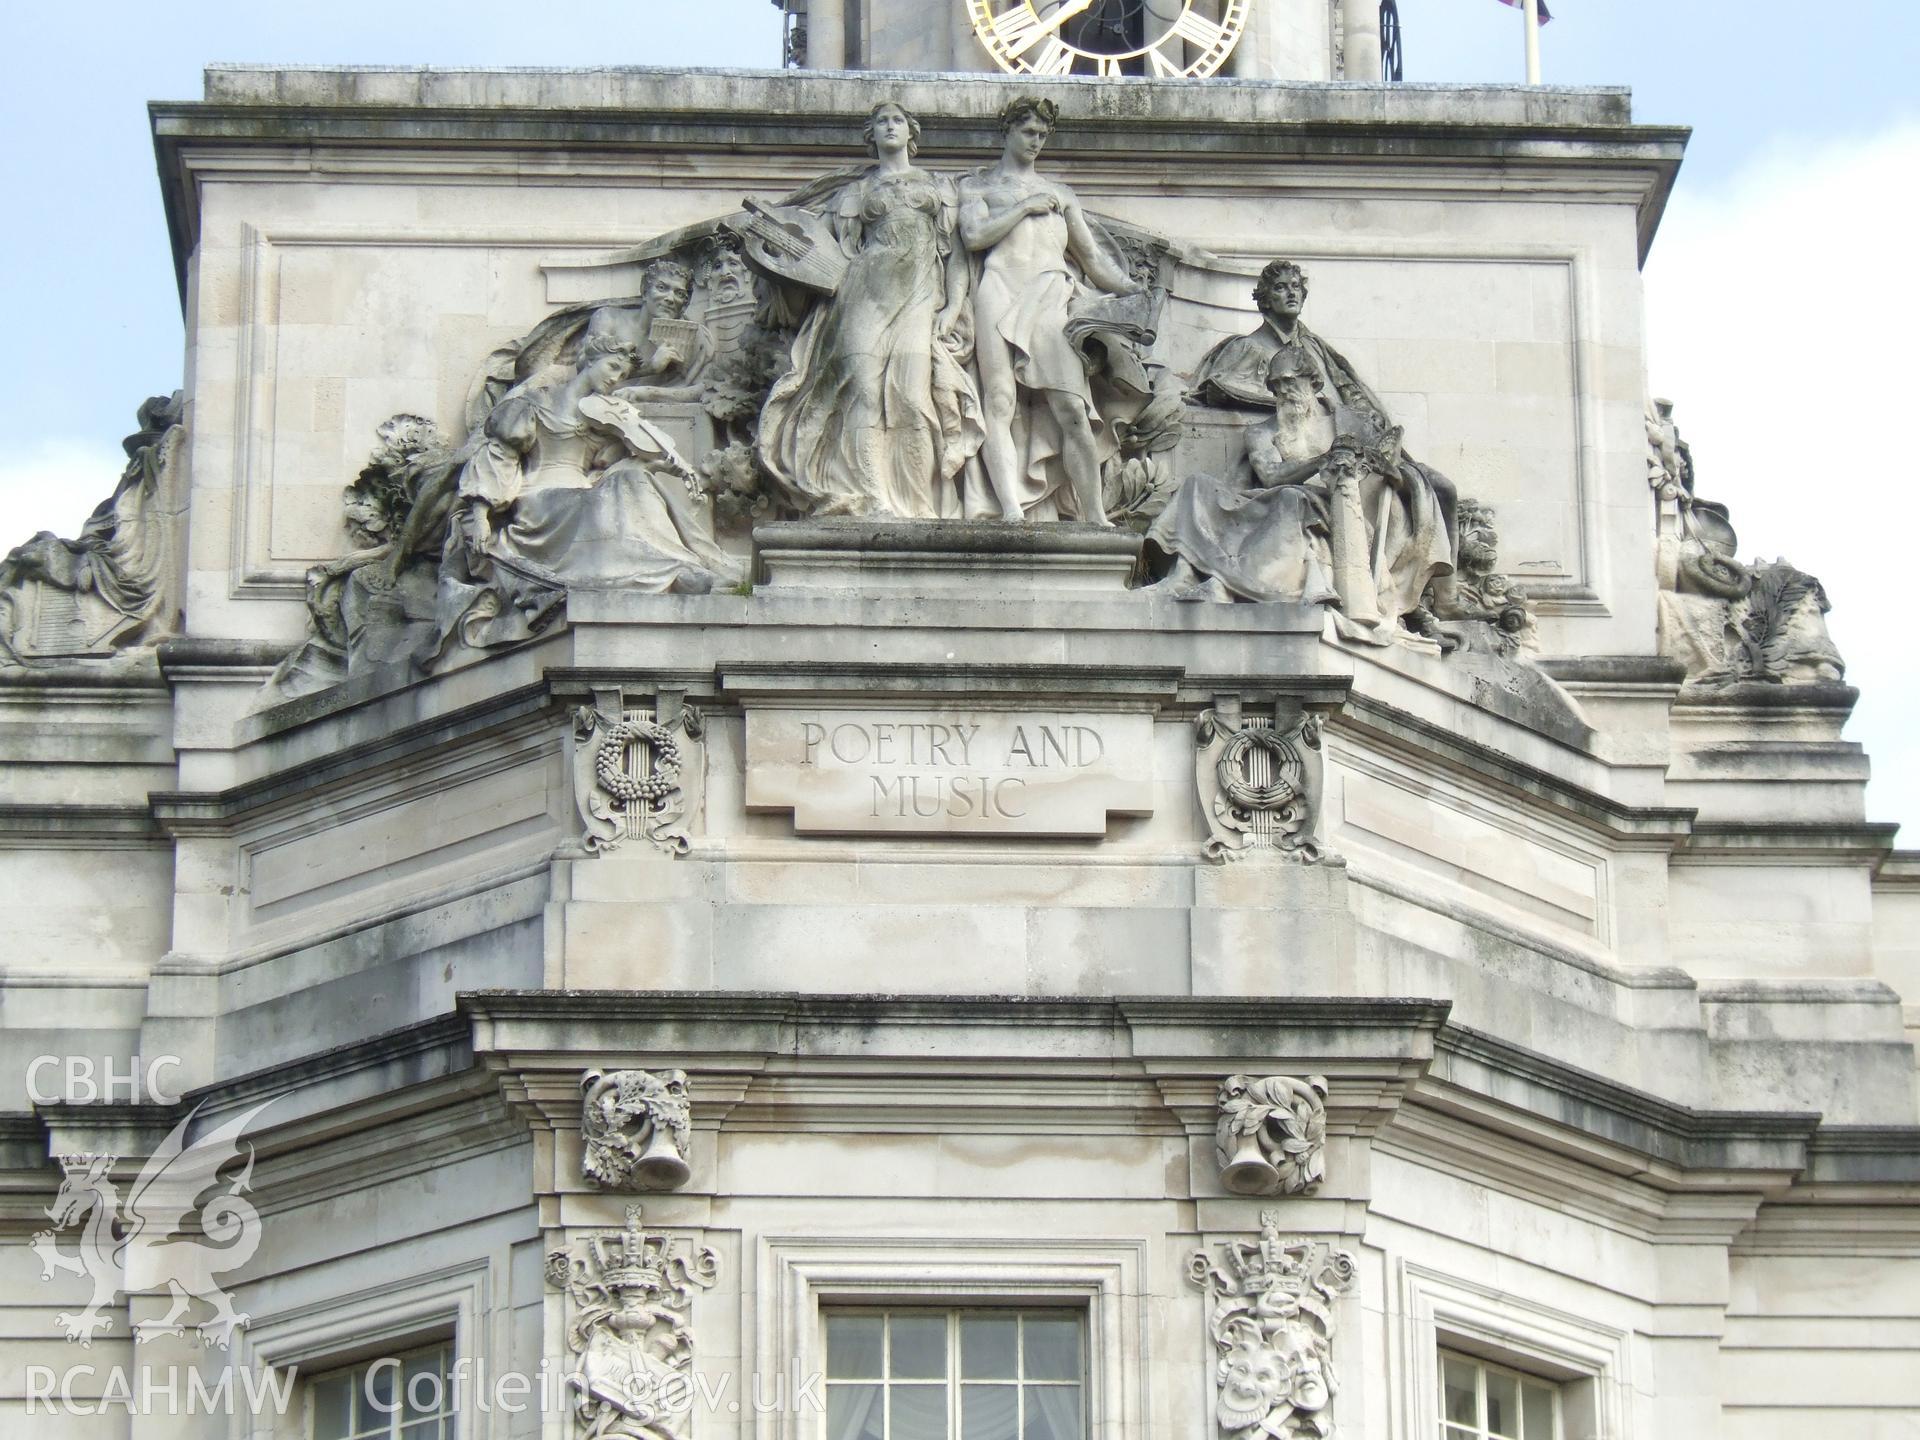 Statuary representing 'Poetry and Music' on the southern pavilion.